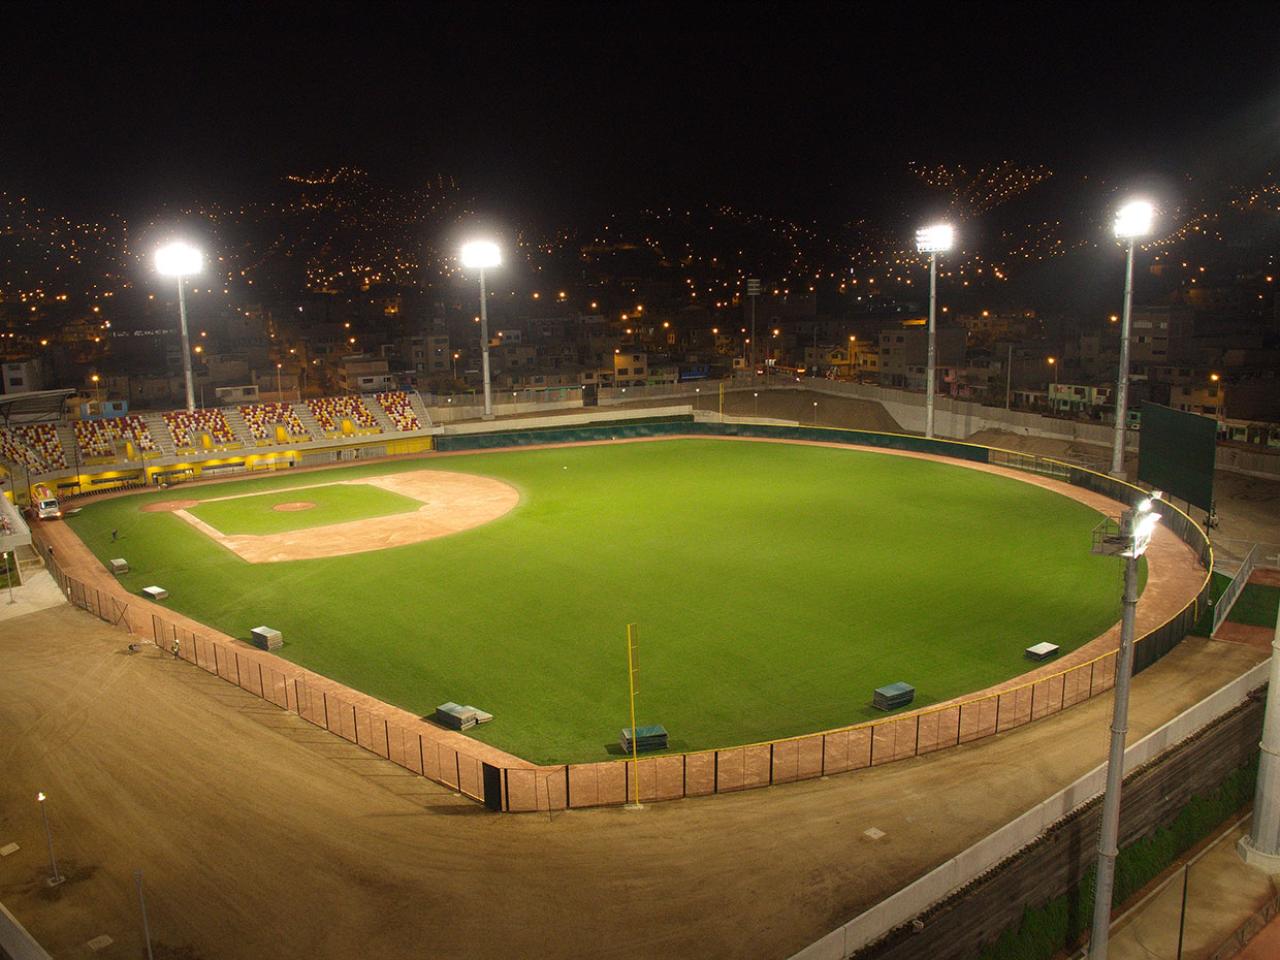 Schreder lighting solutions will ensure perfect visibility for athletes and spectators watching the 2019 Pan American Games